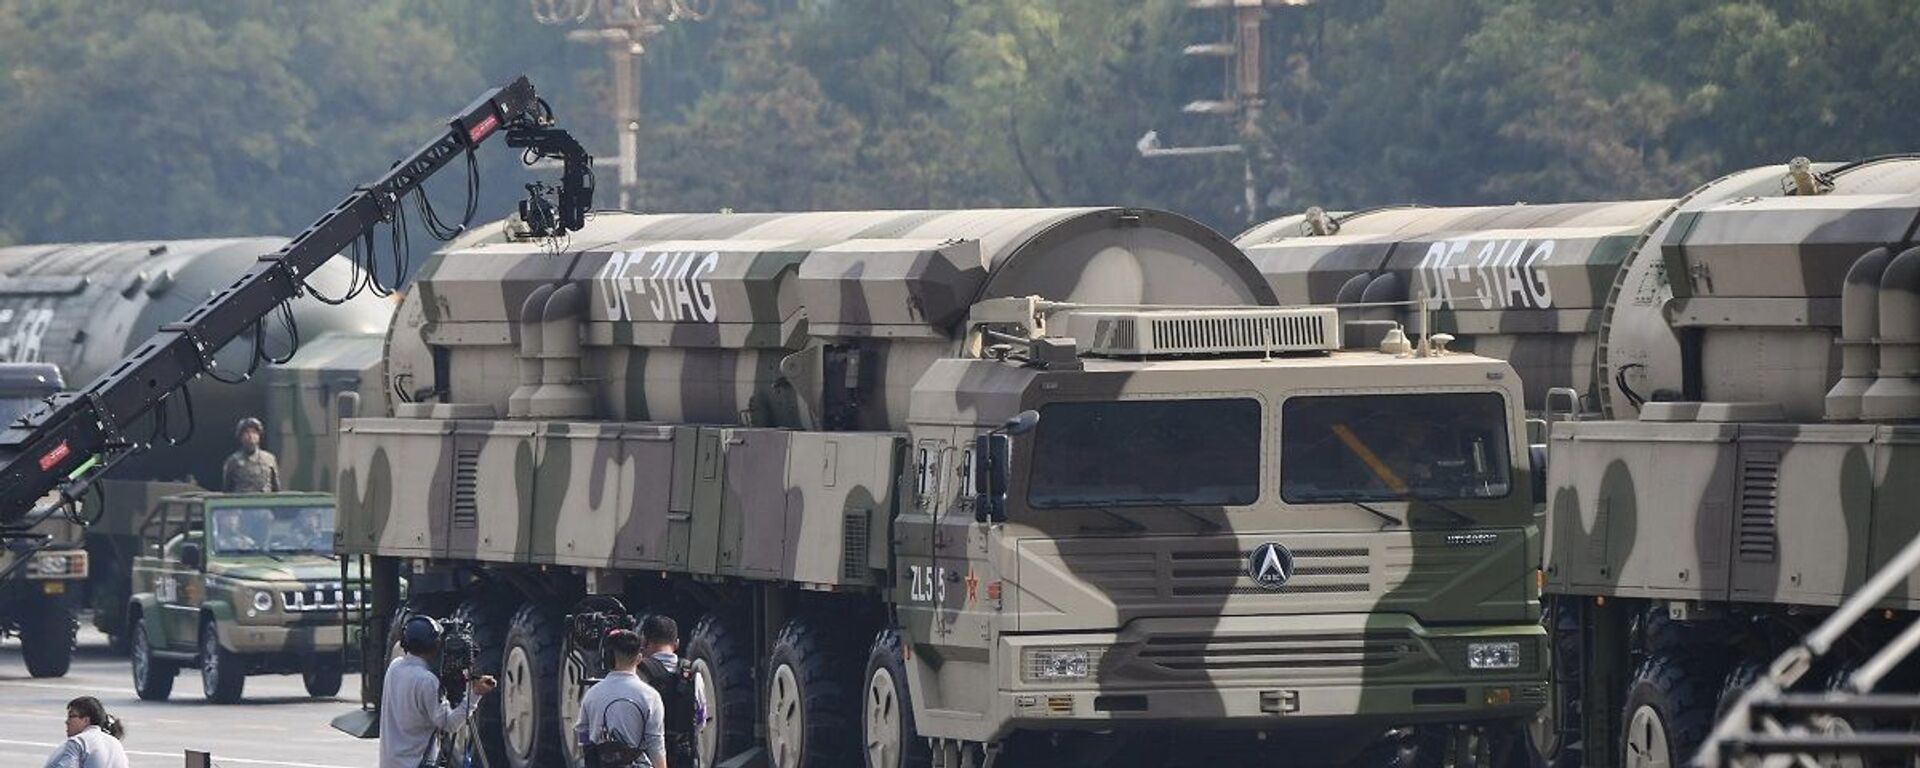 Military vehicles carrying DF-31AG intercontinental ballistic missiles participate in a military parade at Tiananmen Square in Beijing on October 1, 2019, to mark the 70th anniversary of the founding of the People’s Republic of China. - 俄羅斯衛星通訊社, 1920, 06.11.2021